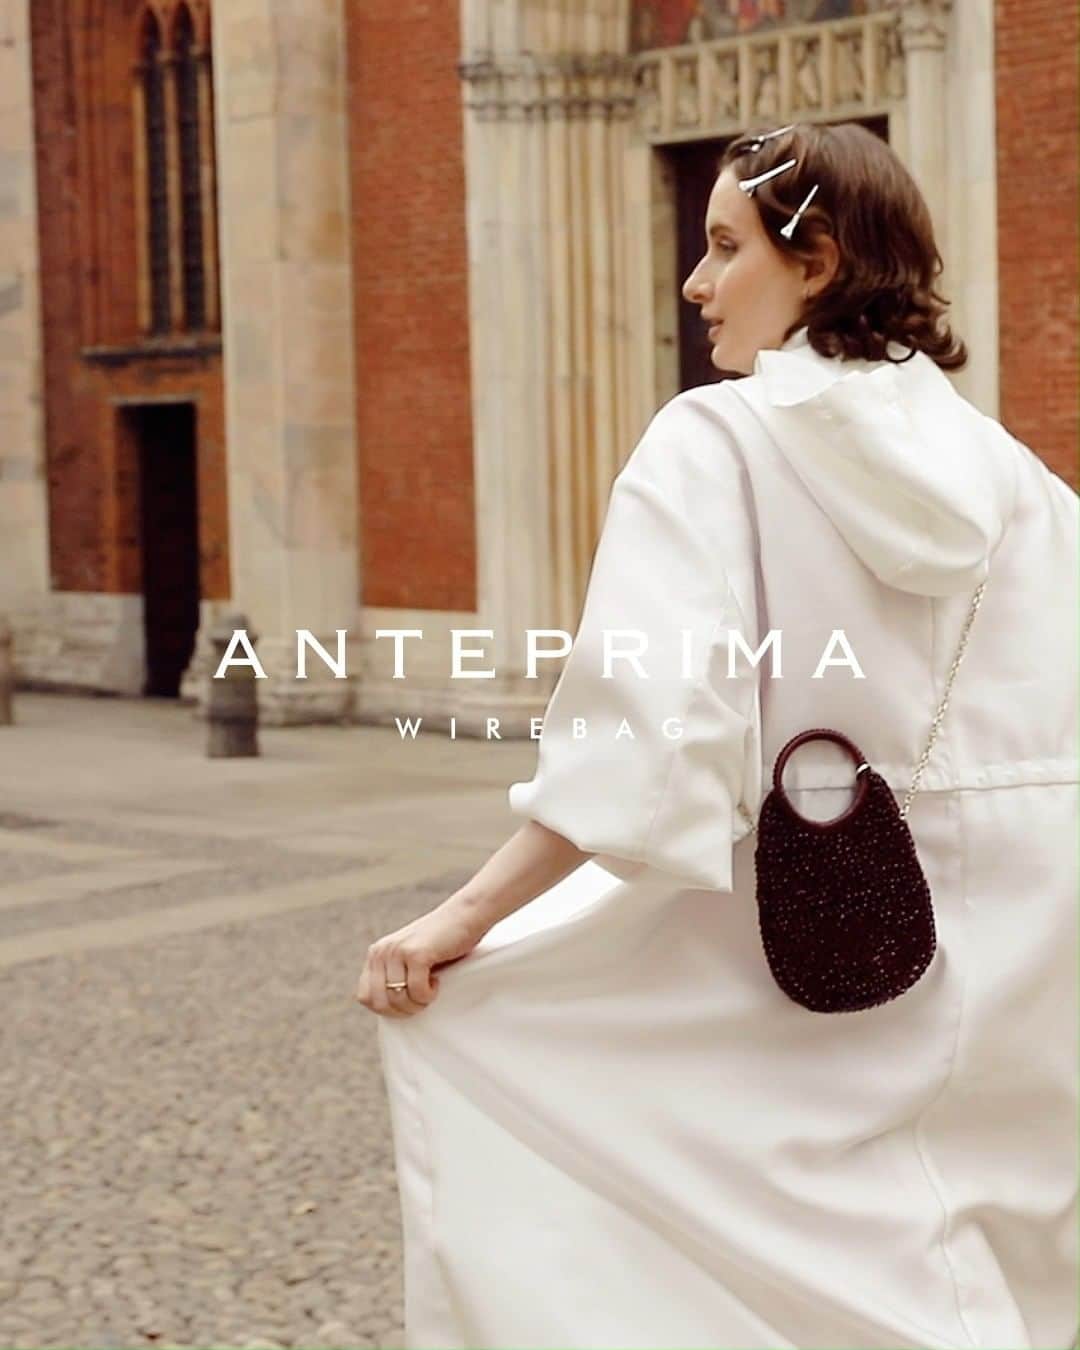 ANTEPRIMAのインスタグラム：「Velvety Statement.  Pampering yourself in a full swing of Milanese aura, @gruzinaolga brought you to the historical Brera in Milan. The burgundy red STANDARD #WIREBAG with the #ANTEPIRMA #SS23 Bianco Jacket saturated this imitative city with delicacy.   Shop the STANDARD WIREBAG now.  #ANTEPRIMA30 #SpringSummer2023 #SS23 #ANTEPRIMA #WIREBAG #MilanStyle #Milan #MilanFashion #Miniature #MicroBag #MiniBag #CraftBag #CrochetBag #Handcraft #KnitBag #WorkBag #ItalianDesign #Craftmanship #アンテプリマ」